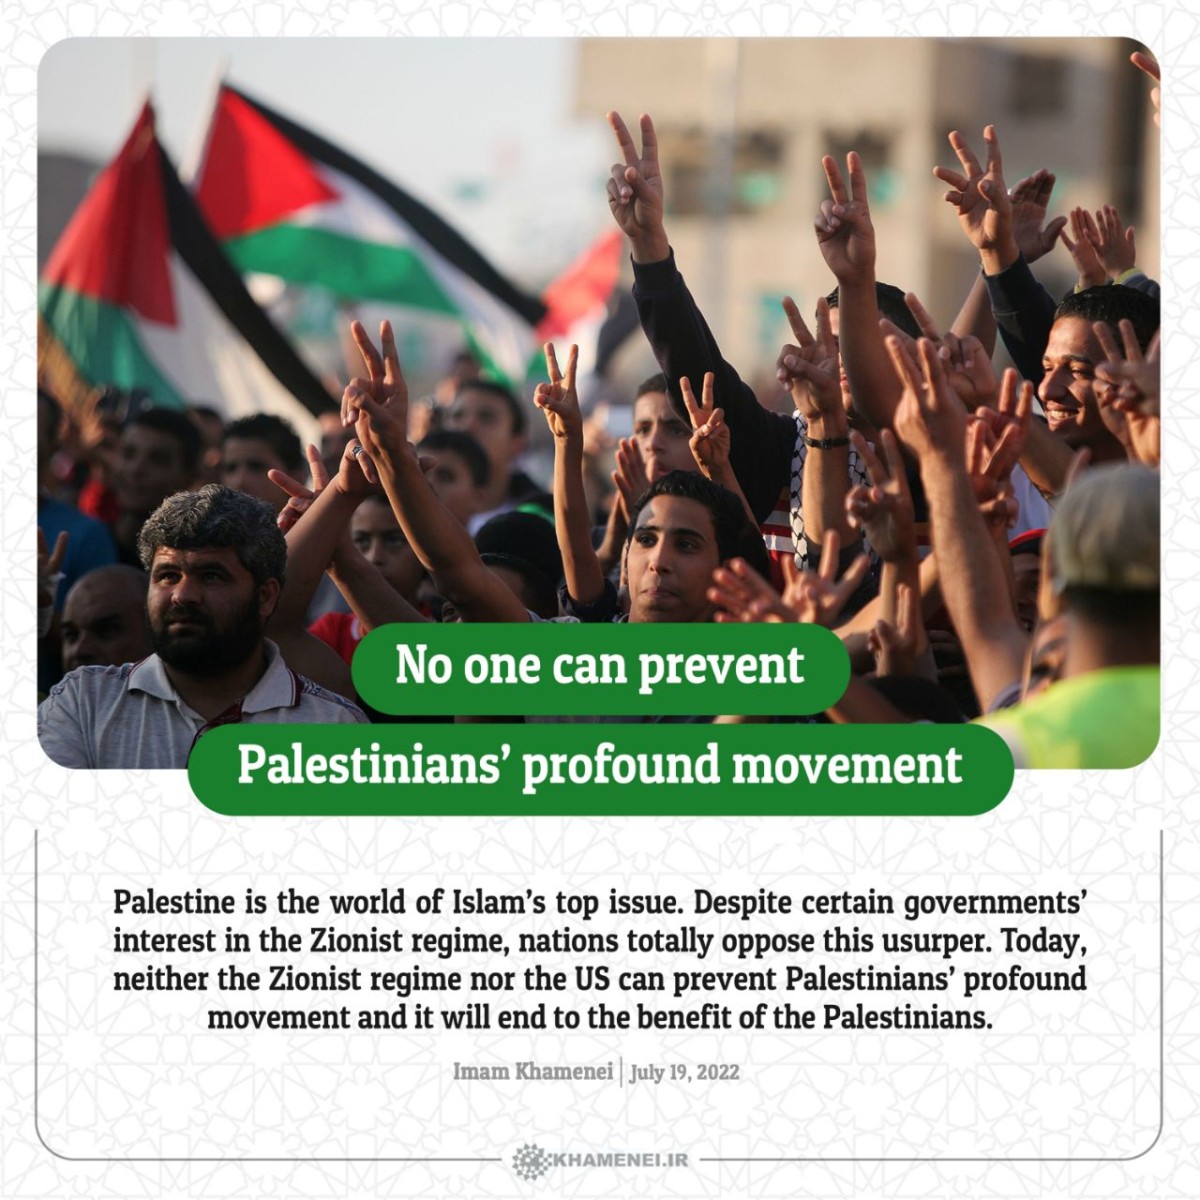 No one can prevent Palestinians’ profound movement